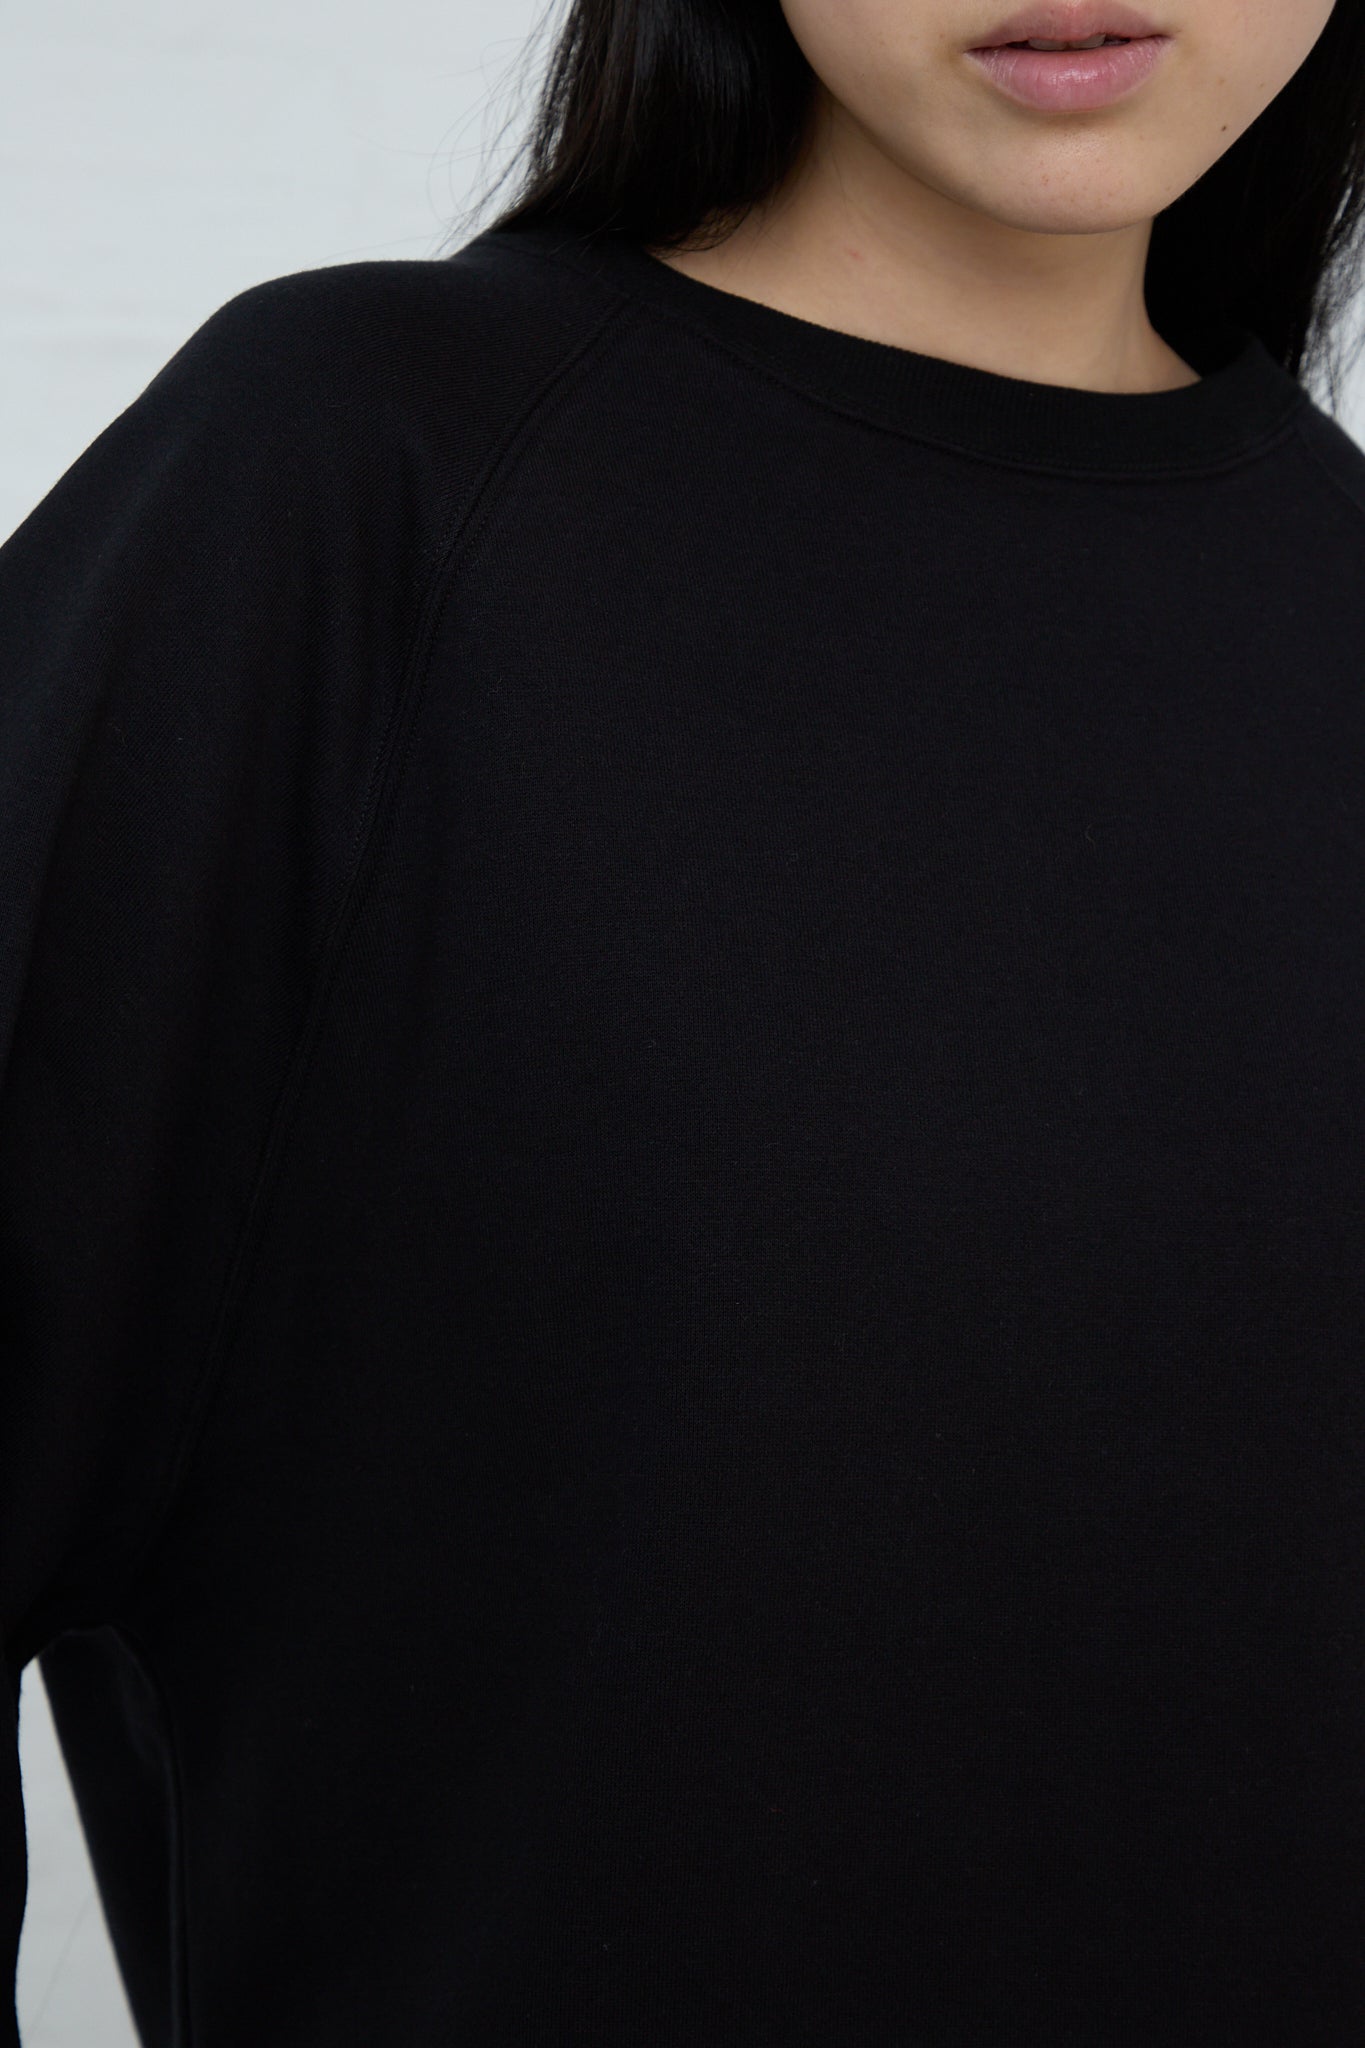 A woman wearing an Ichi Cotton Knit Pullover in Black. Front view and up close.